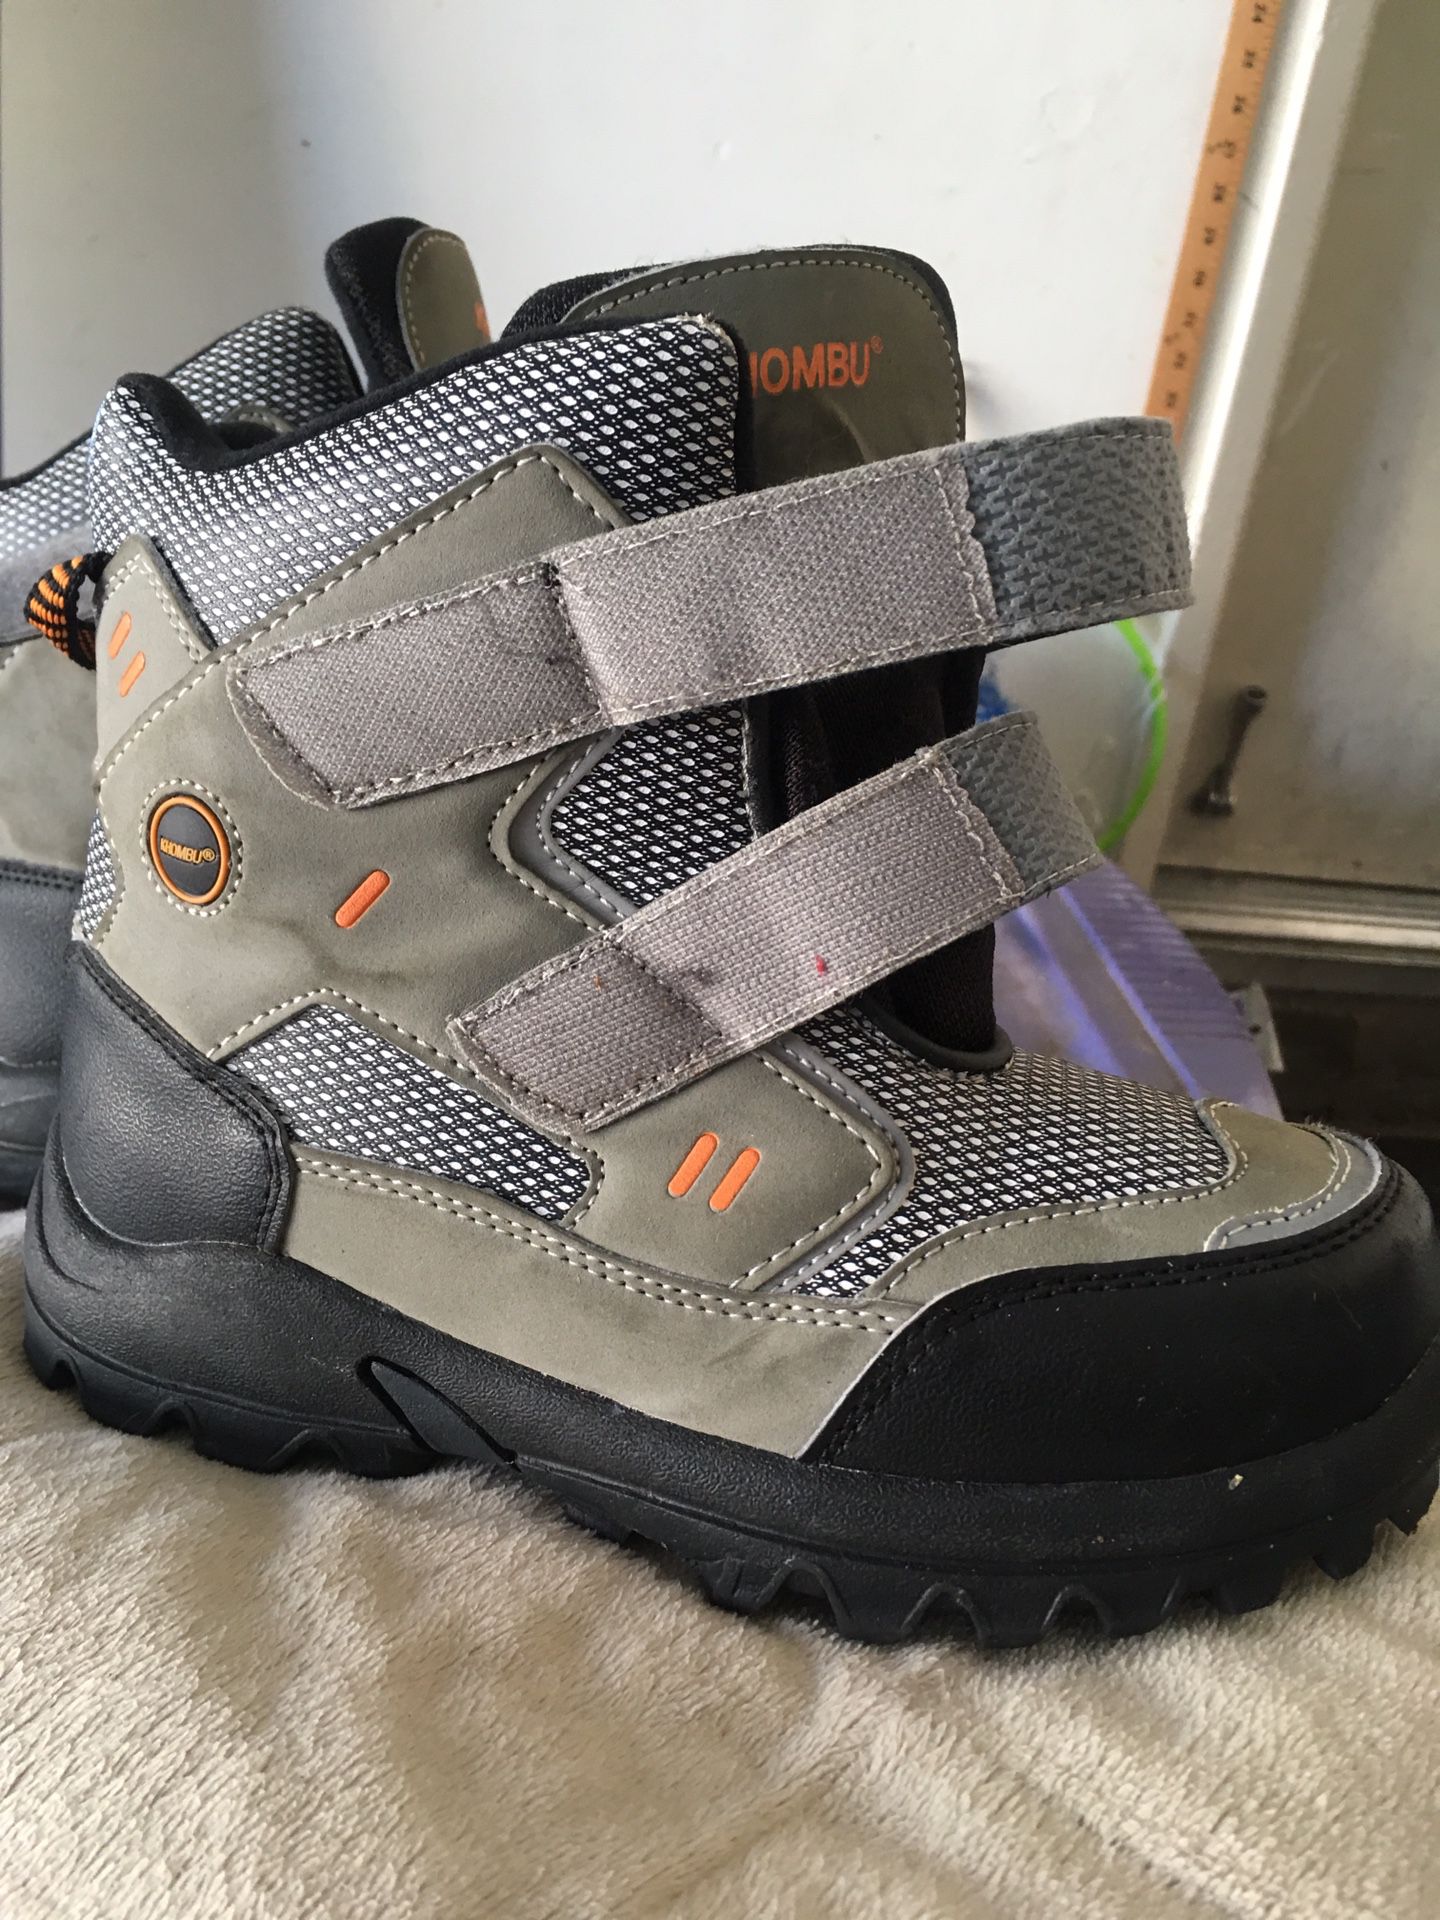 Snow boots for kids $10